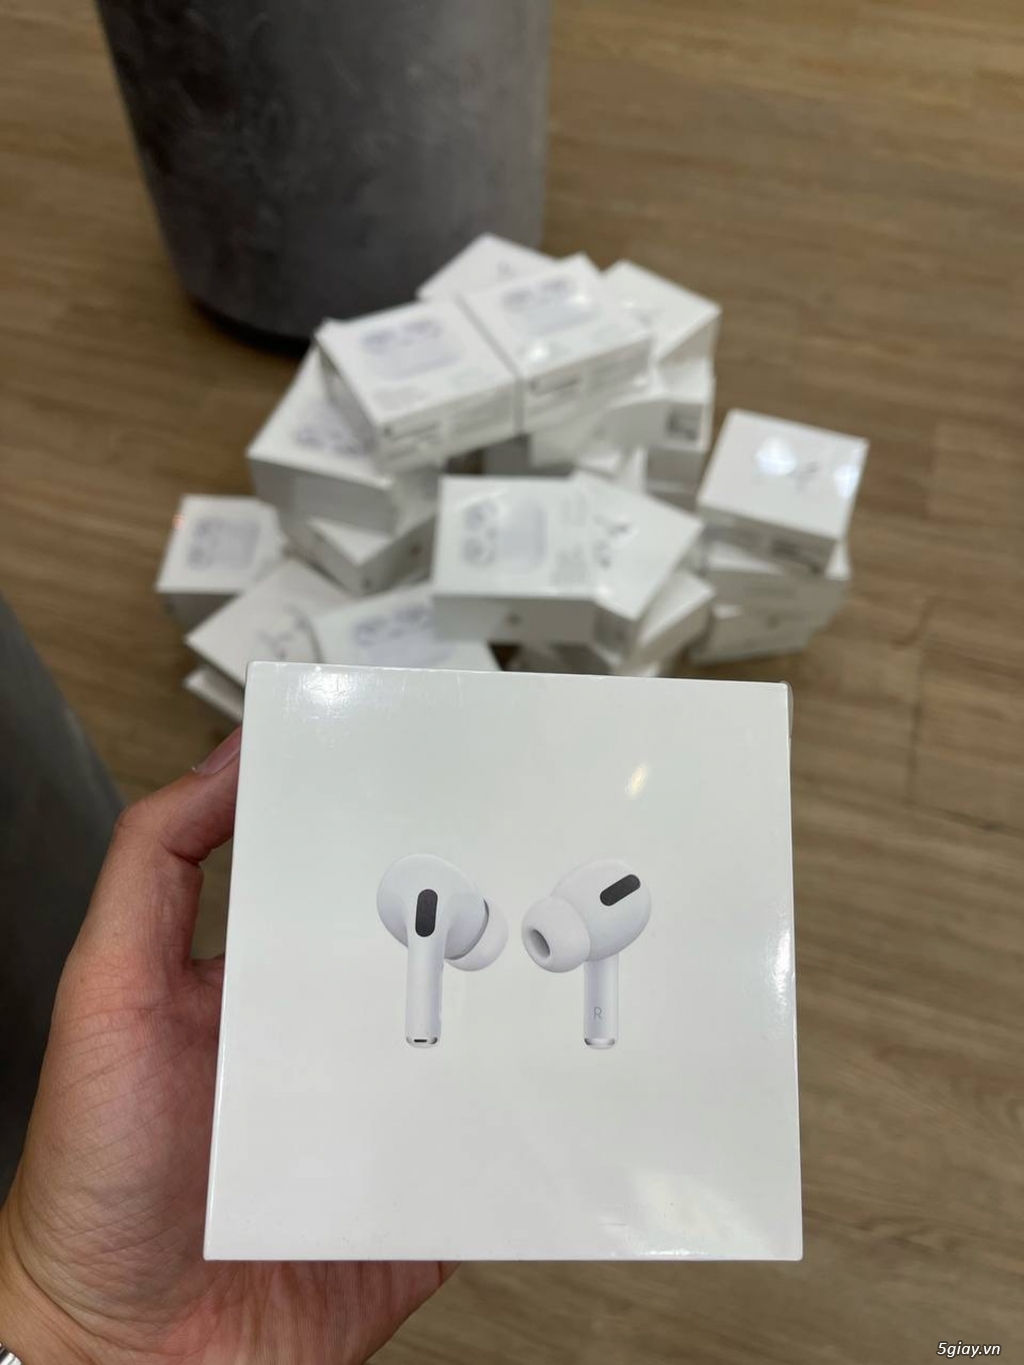 Airpod Pro newseal VN/A - 2